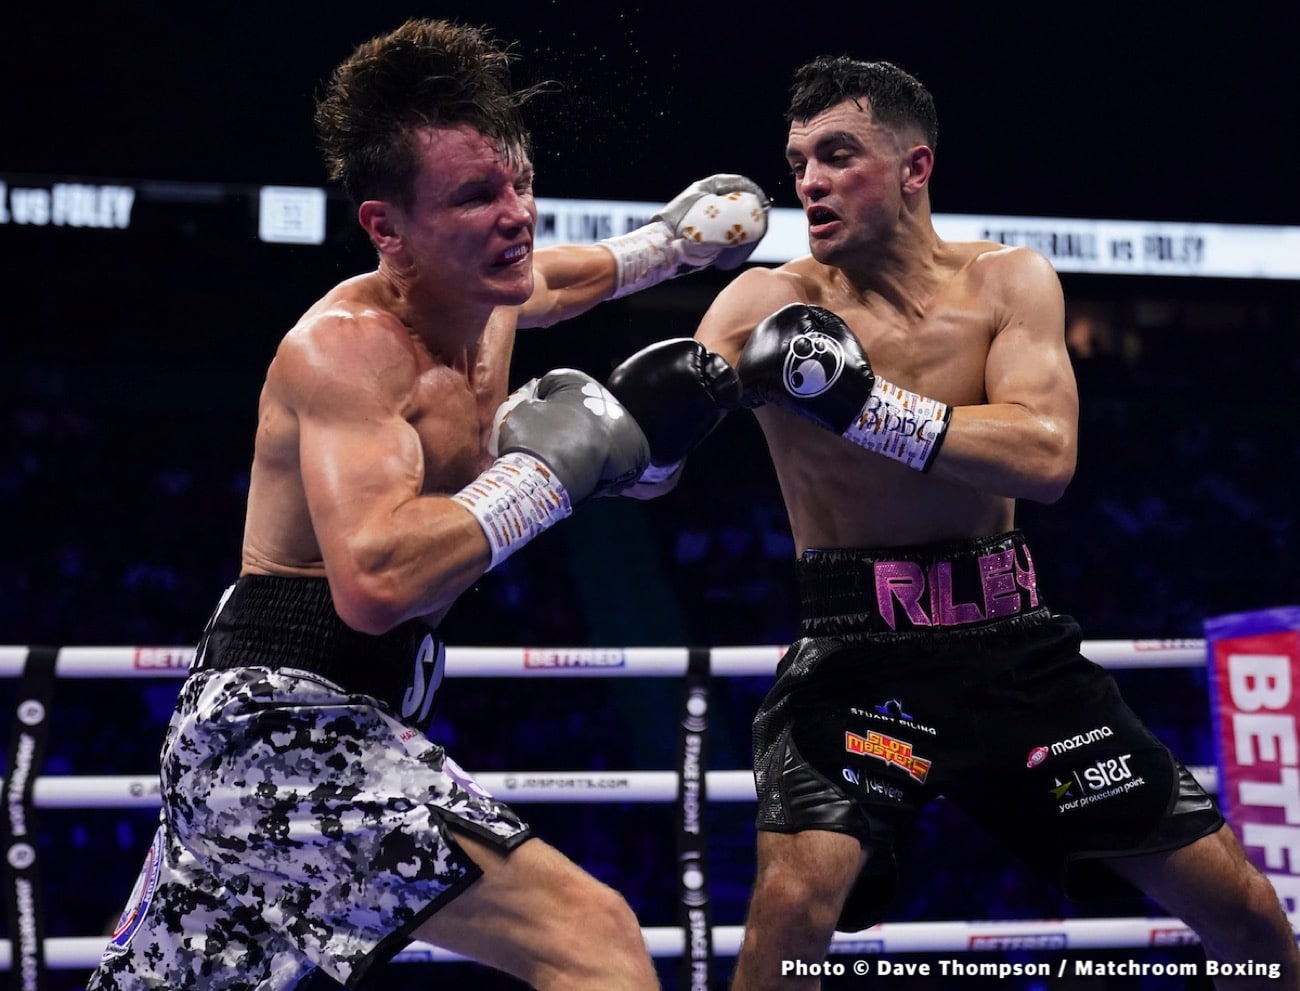 Jack Catterall Returns With Much Needed Fight/Win - Boxing Results